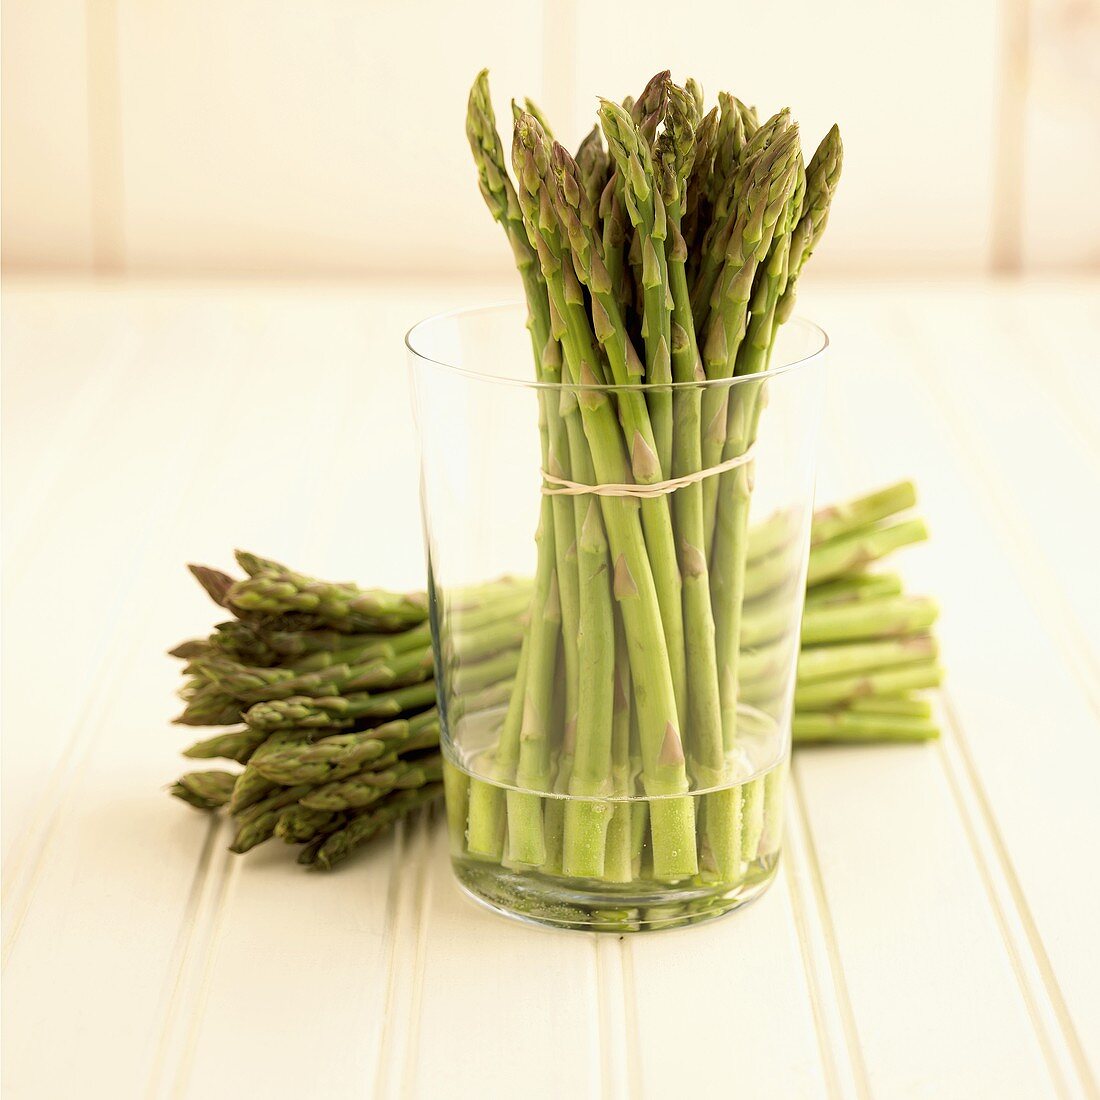 Asparagus Bundle in a Glass with Water with Bundle of Asparagus Next to Glass